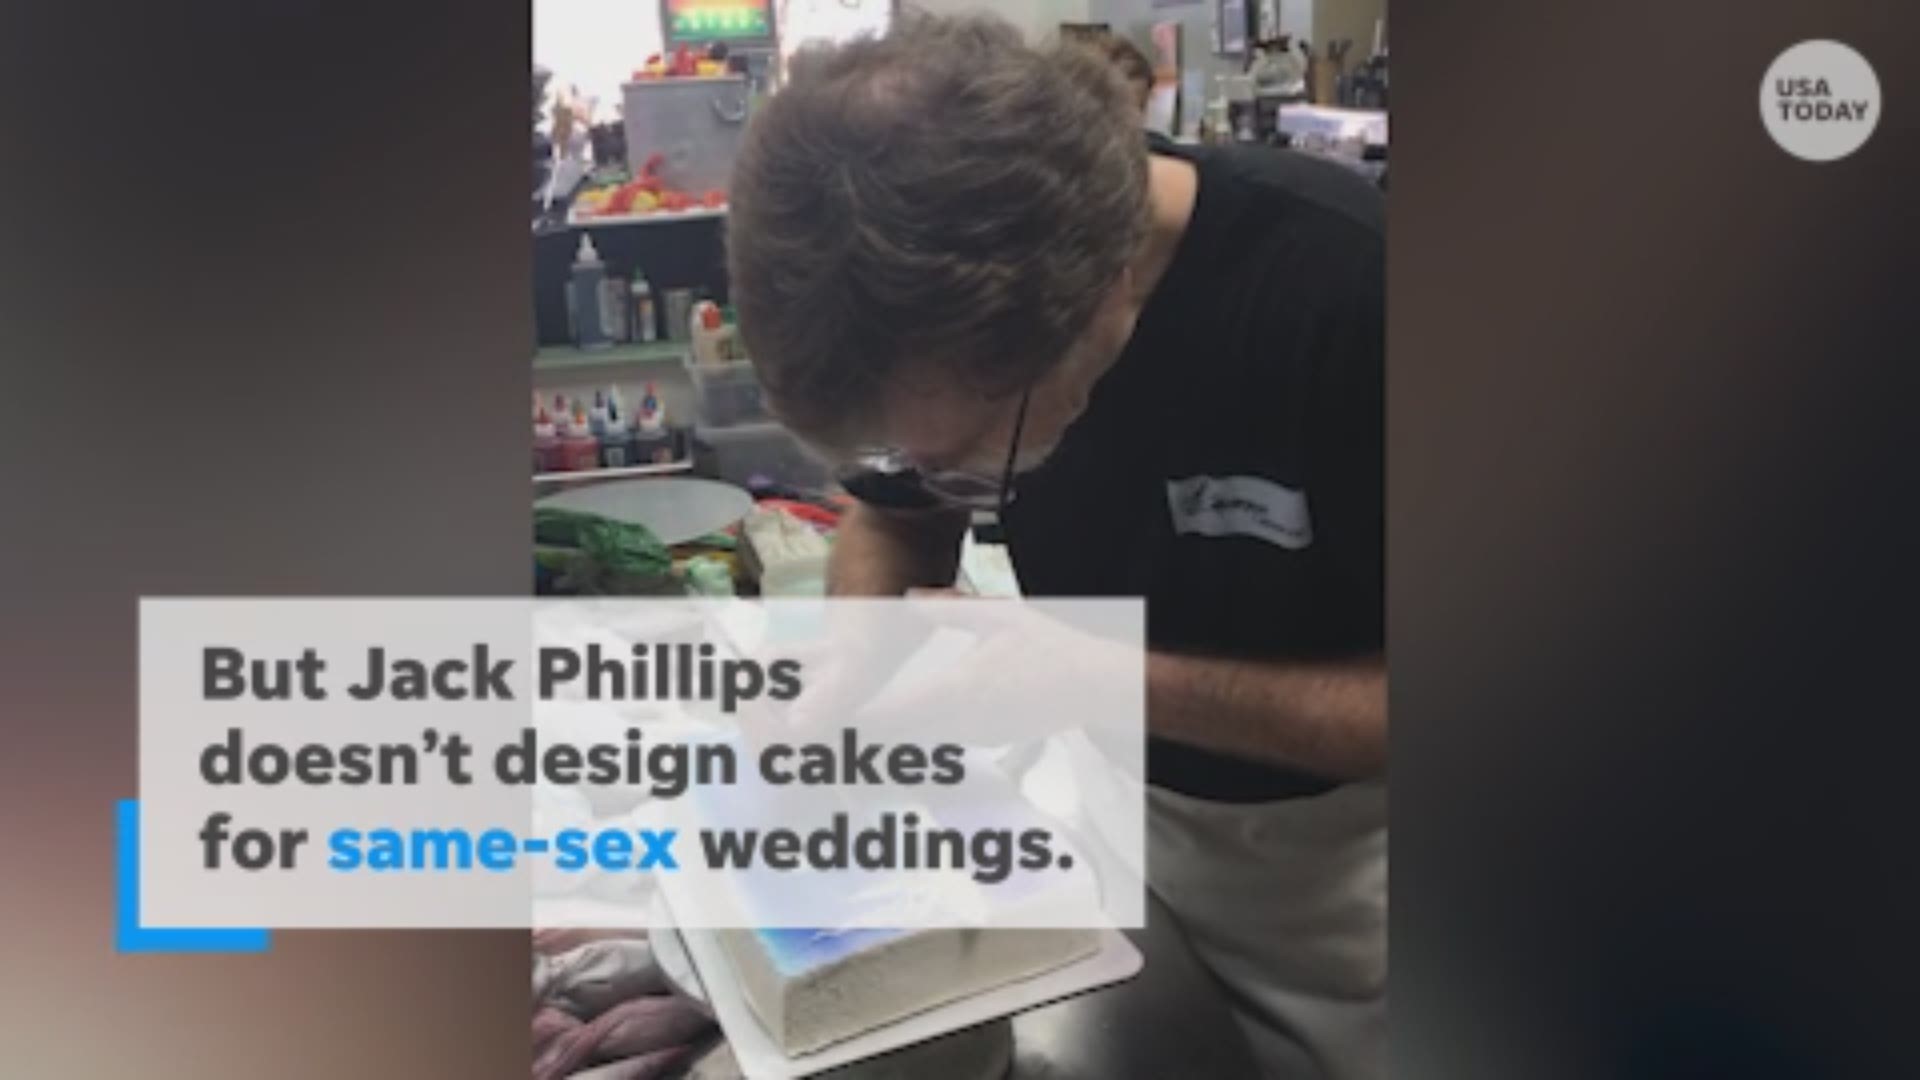 When Charlie Craig and David Mullins walked into Jack Phillips' bakery, they were looking for a wedding cake. Five years later, all three are embroiled in a watershed Supreme Court case that will decide the limits of free speech. USA TODAY